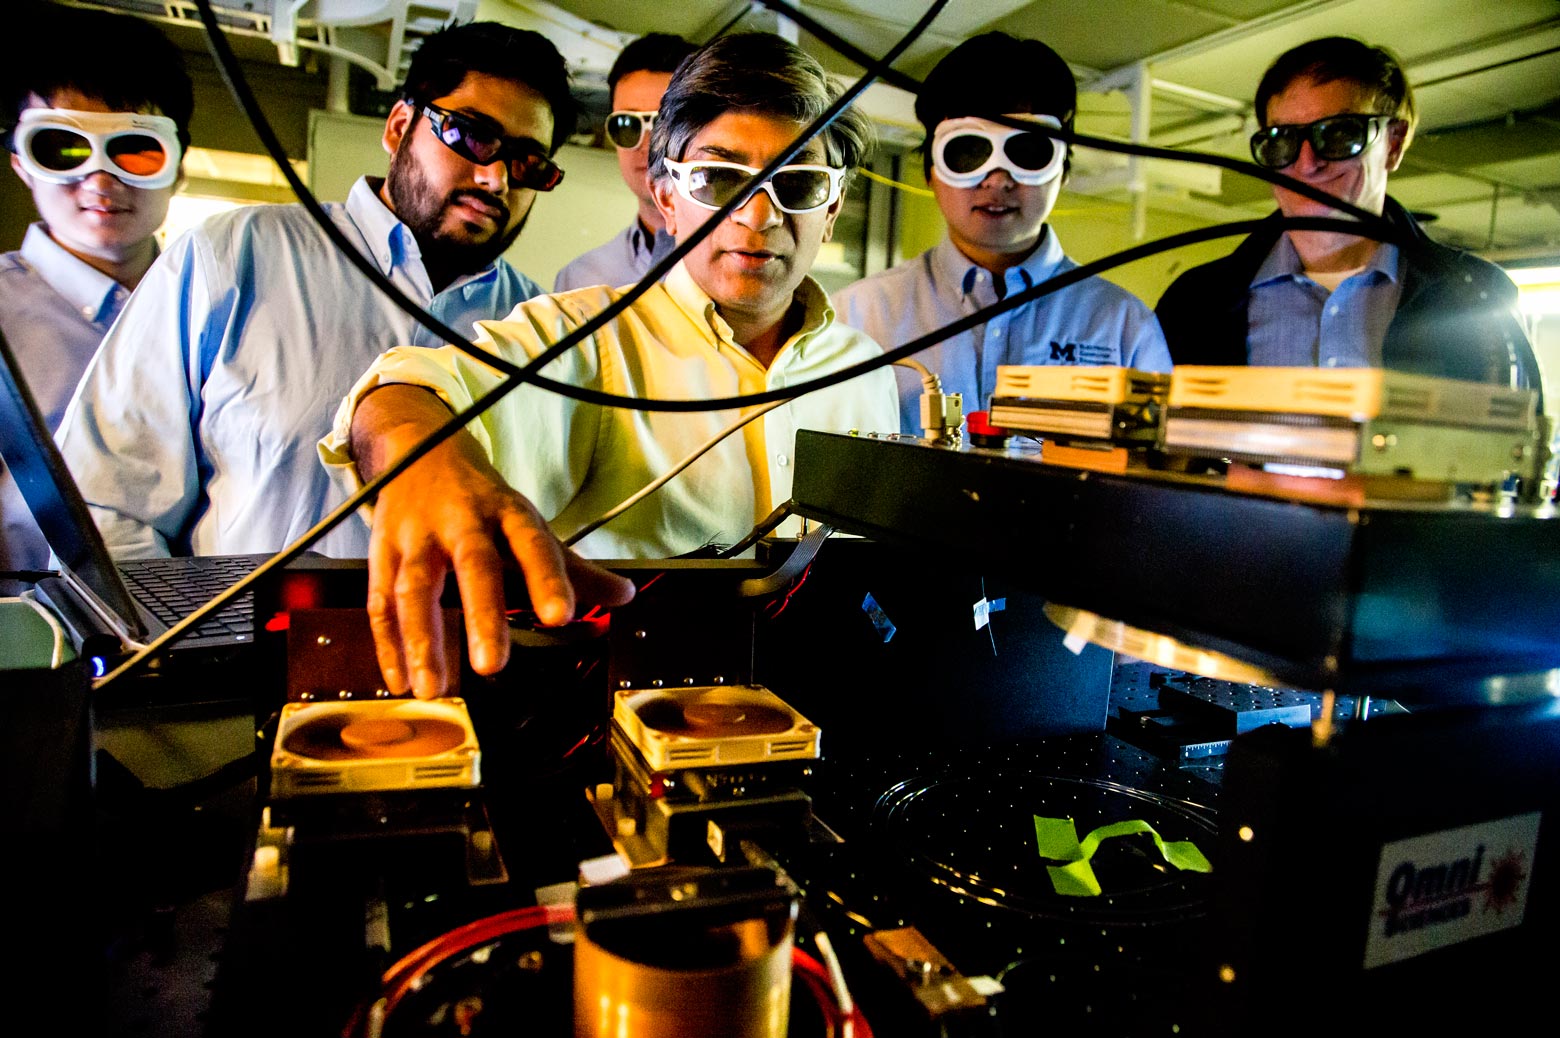 5 researchers work with computer sensors